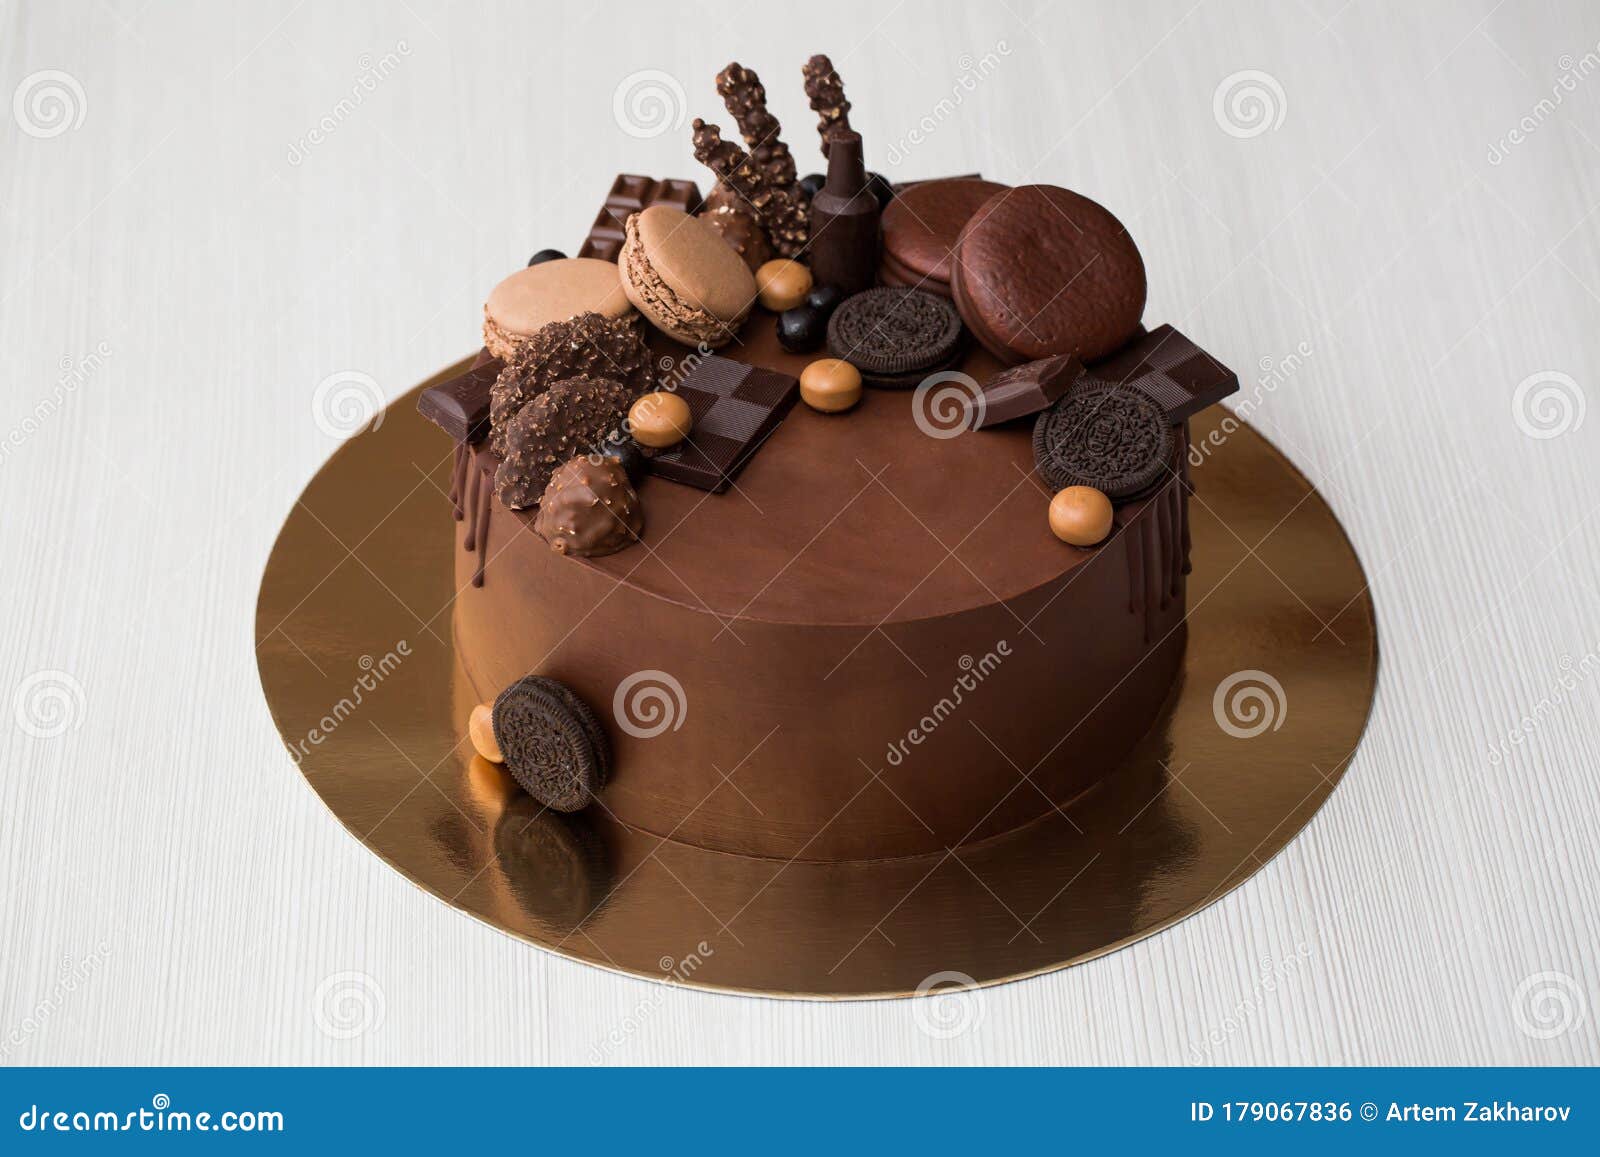 Chocolate Cake for Men with Chocolate Decorations and the Streaks ...